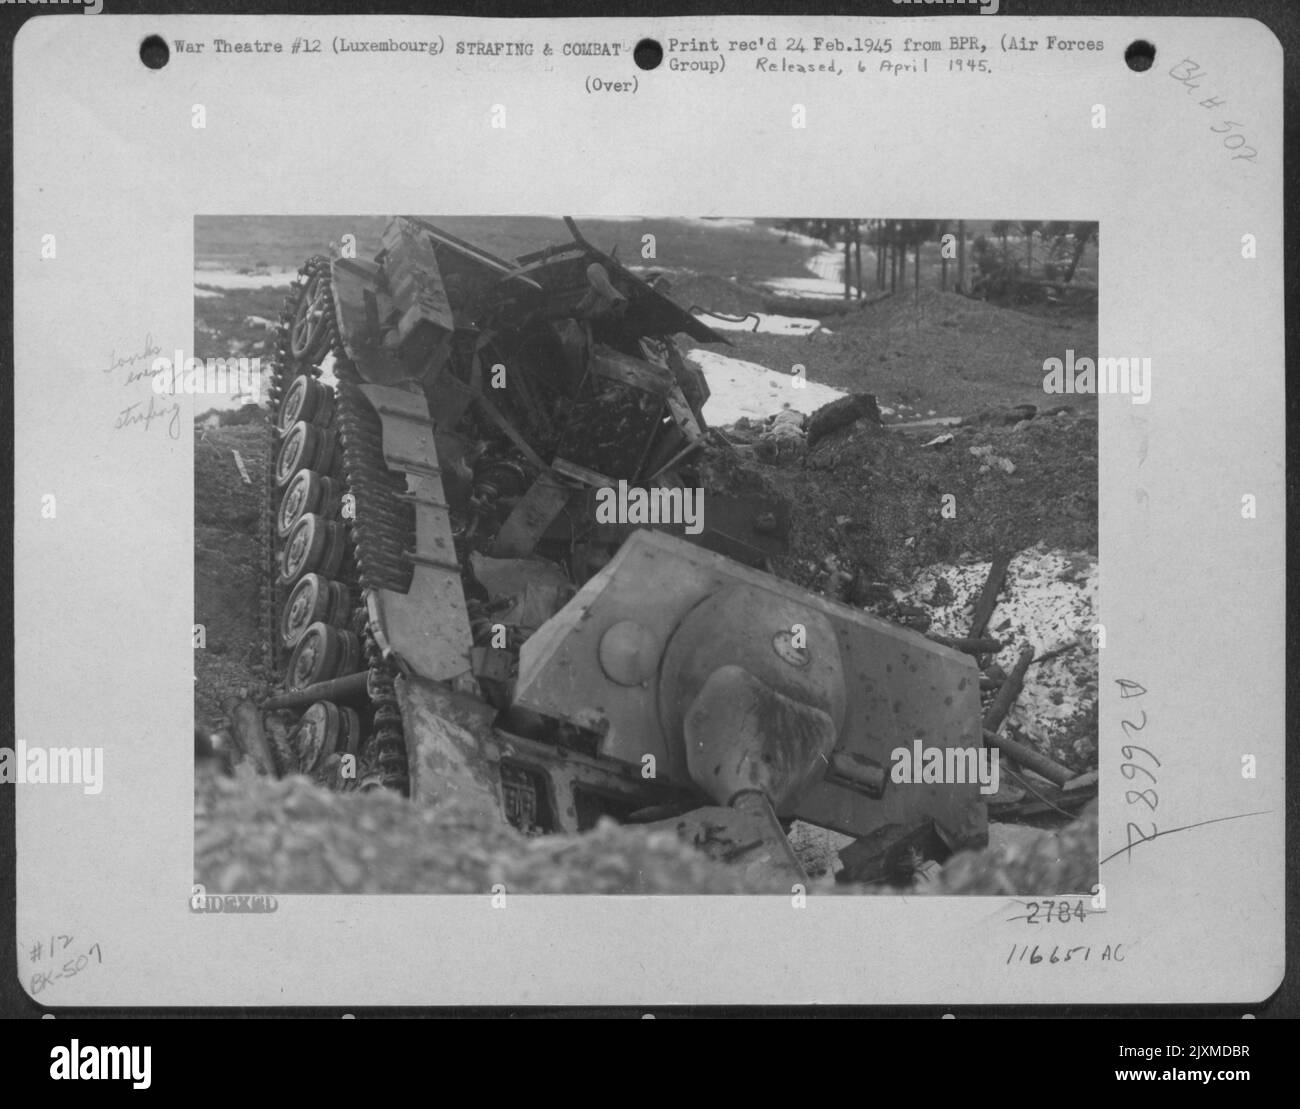 A Self-Propelled [Jagdpanzer Iv Anti-Tank] Gun On A Mark Iv Tank Chassis Lies Smashed In A Bomb Crater Near Marnach, 3 Miles West Of Dasburg, Destroyed By Fighter-Bombers Of The Xix Tac During Mass German Withdrawal Across The Our River Jan 22-25, 1945. Stock Photo